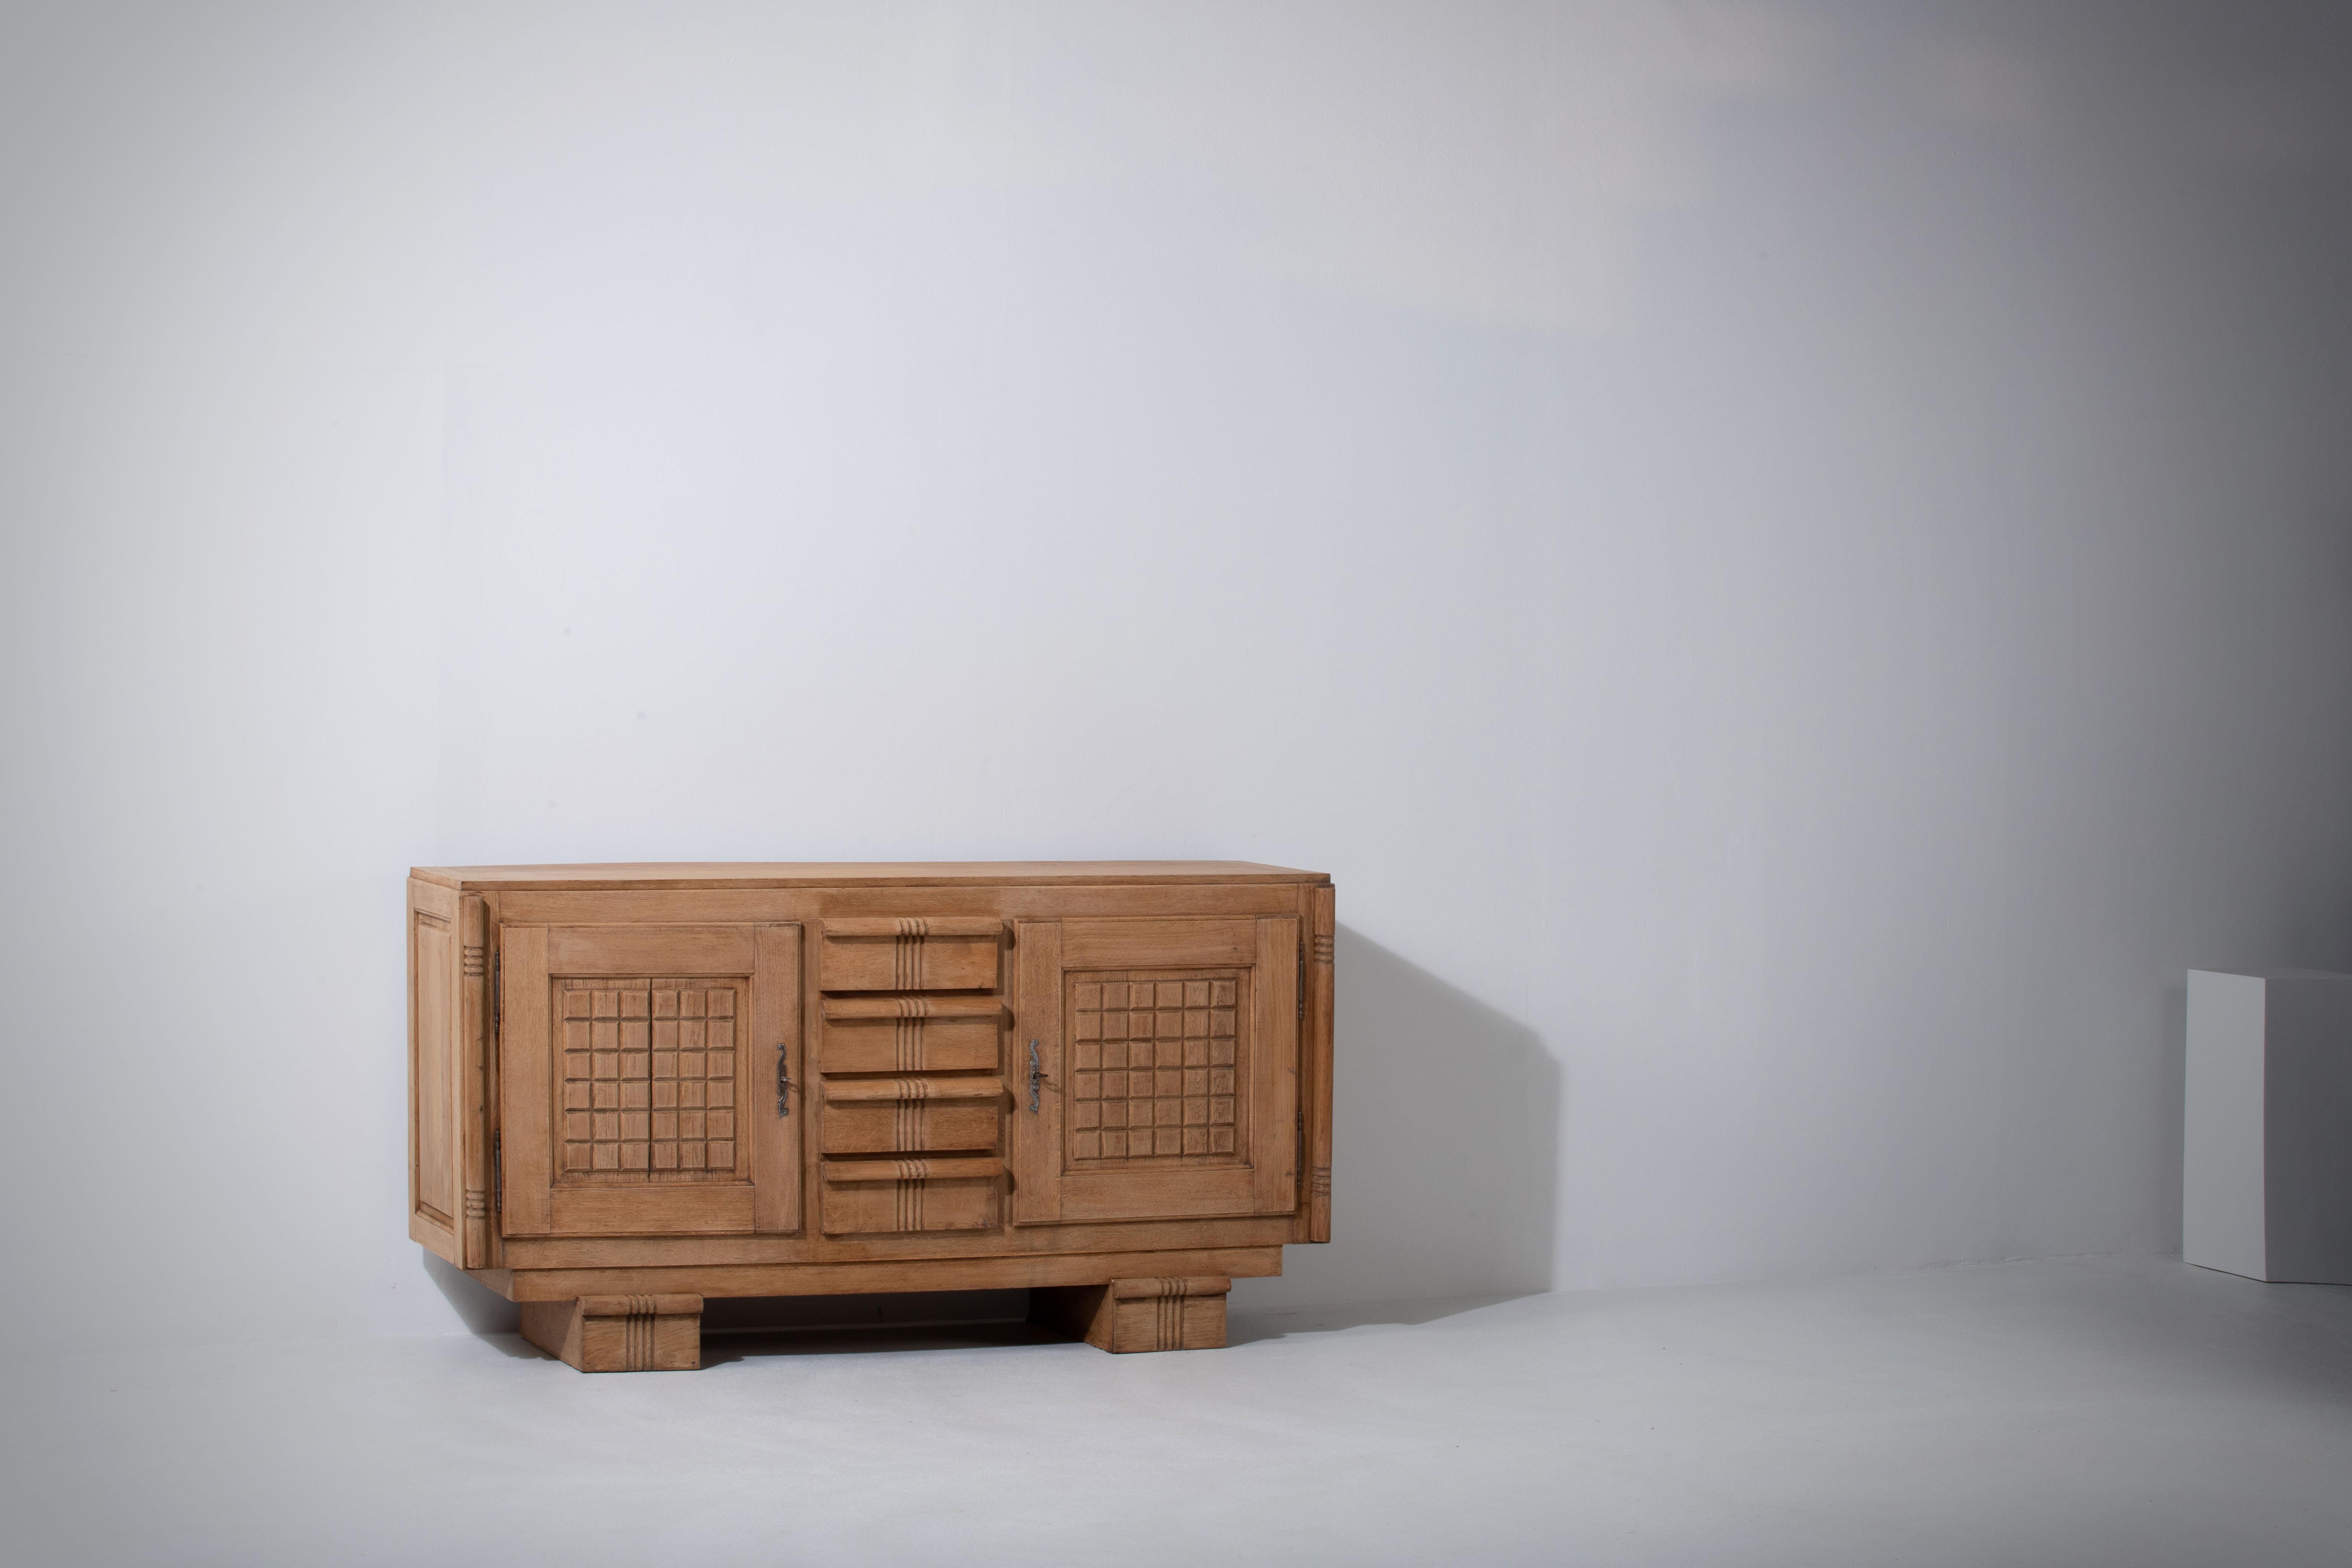 Credenza, solid oak, France, 1940s, Charles Dudouyt.
Large Art Deco Brutalist sideboard. 
The credenza consists of three central drawers and two storage facilities and covered with very detailed designed door panels. 
The refined wooden